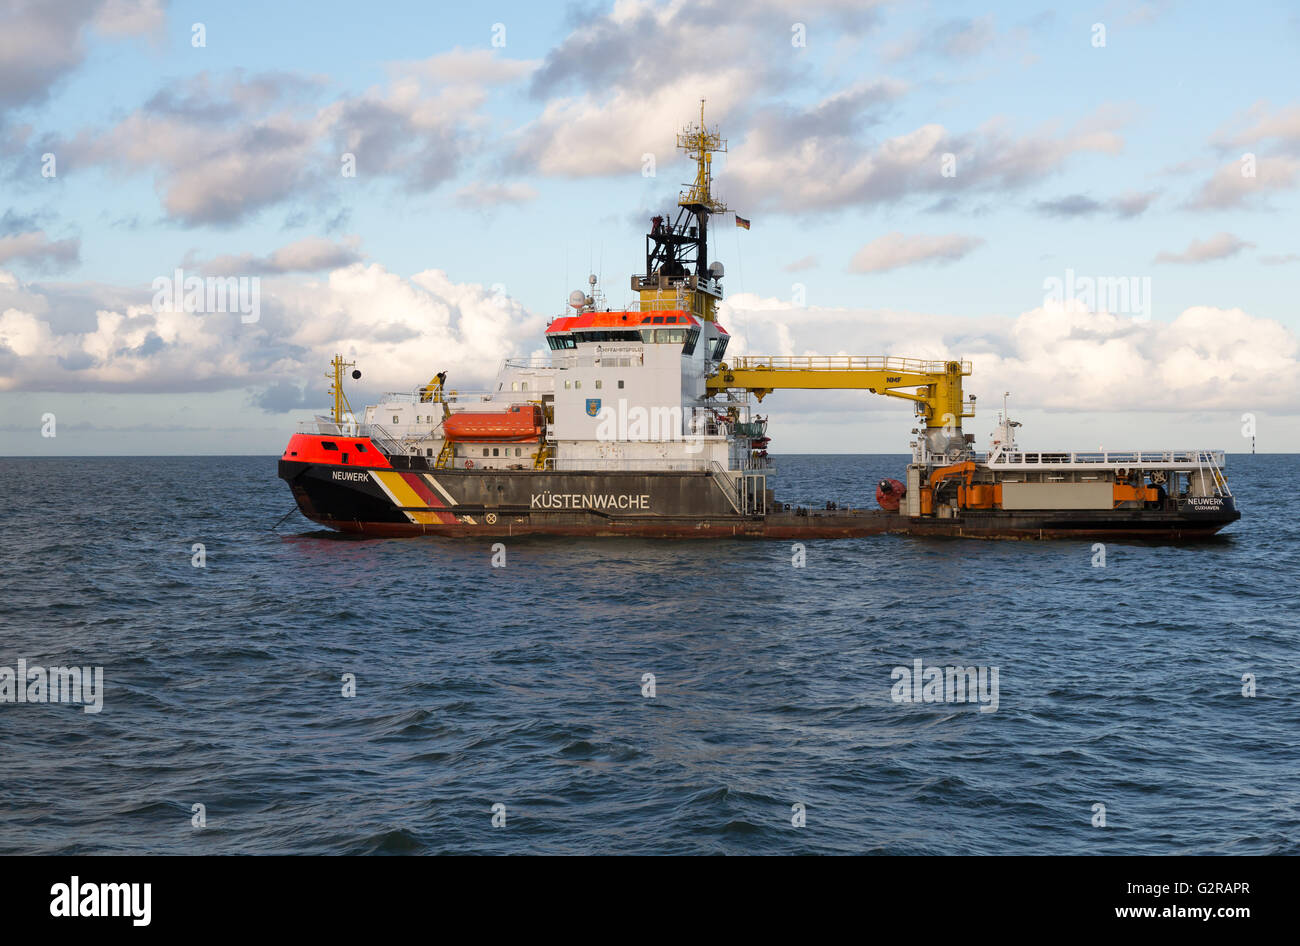 20.09.2015, Neuwerk, Hamburg, Germany - Ship of Coastguard at the island Neuwerk in the German Bight. / Ship of the German coast guard by the Iceland Neuwerk in the German Bay. 00A150920D311CAROEX.JPG - NOT for SALE in G E R M A N Y, A U S T R I A, S W I T Z E R L A N D [MODEL RELEASE: NOT APPLICABLE, PROPERTY RELEASE: NO, (c) caro photo agency / Bastian, http://www.caro-images.com, info@carofoto.pl - Any use of this picture is subject to royalty!] Stock Photo